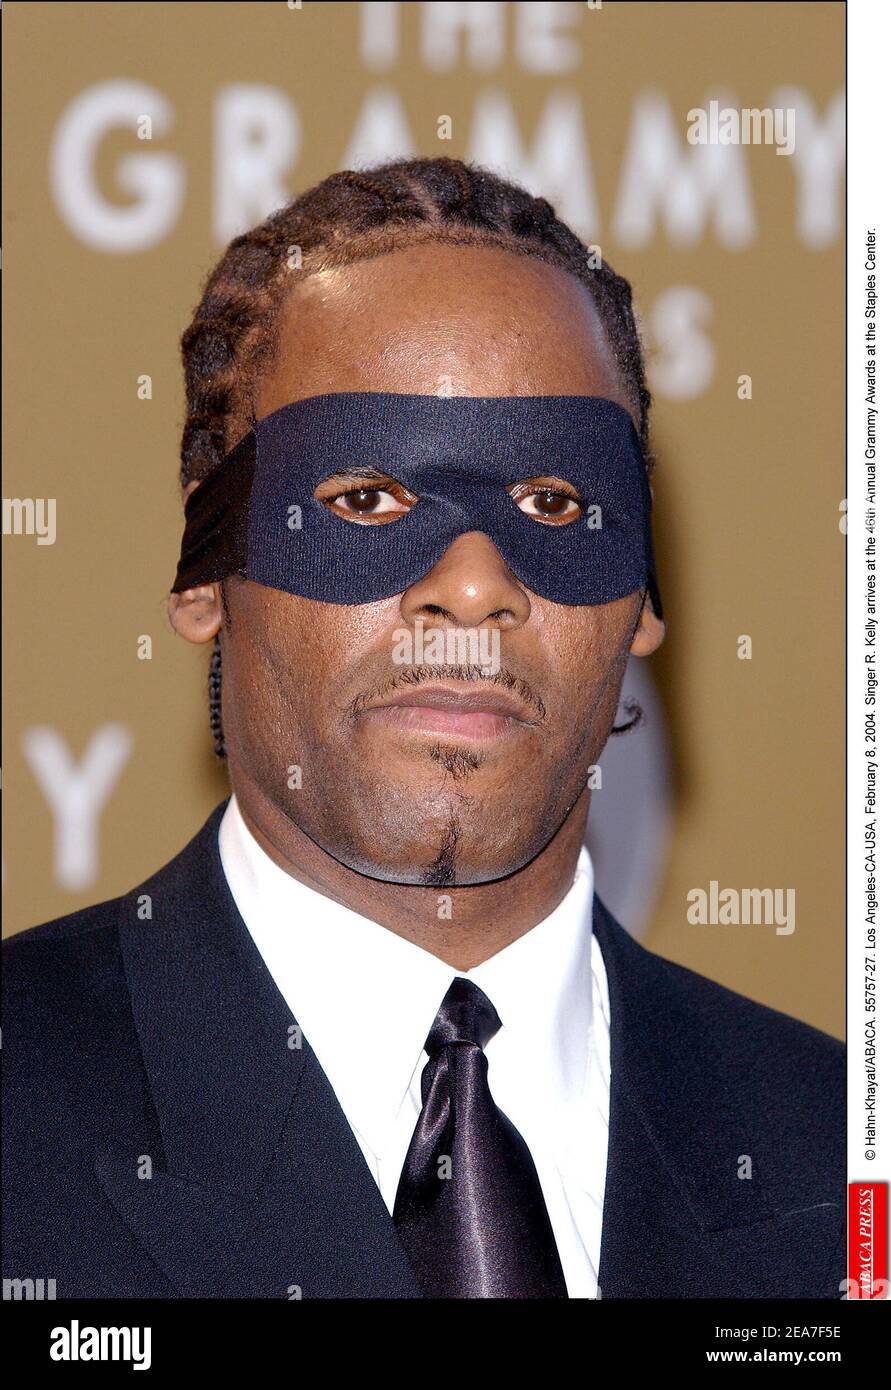 Hahn-Khayat/ABACA. 55757-27. Los Angeles-CA-USA, February 8, 2004. Singer R.  Kelly arrives at the 46th Annual Grammy Awards at the Staples Center Stock  Photo - Alamy